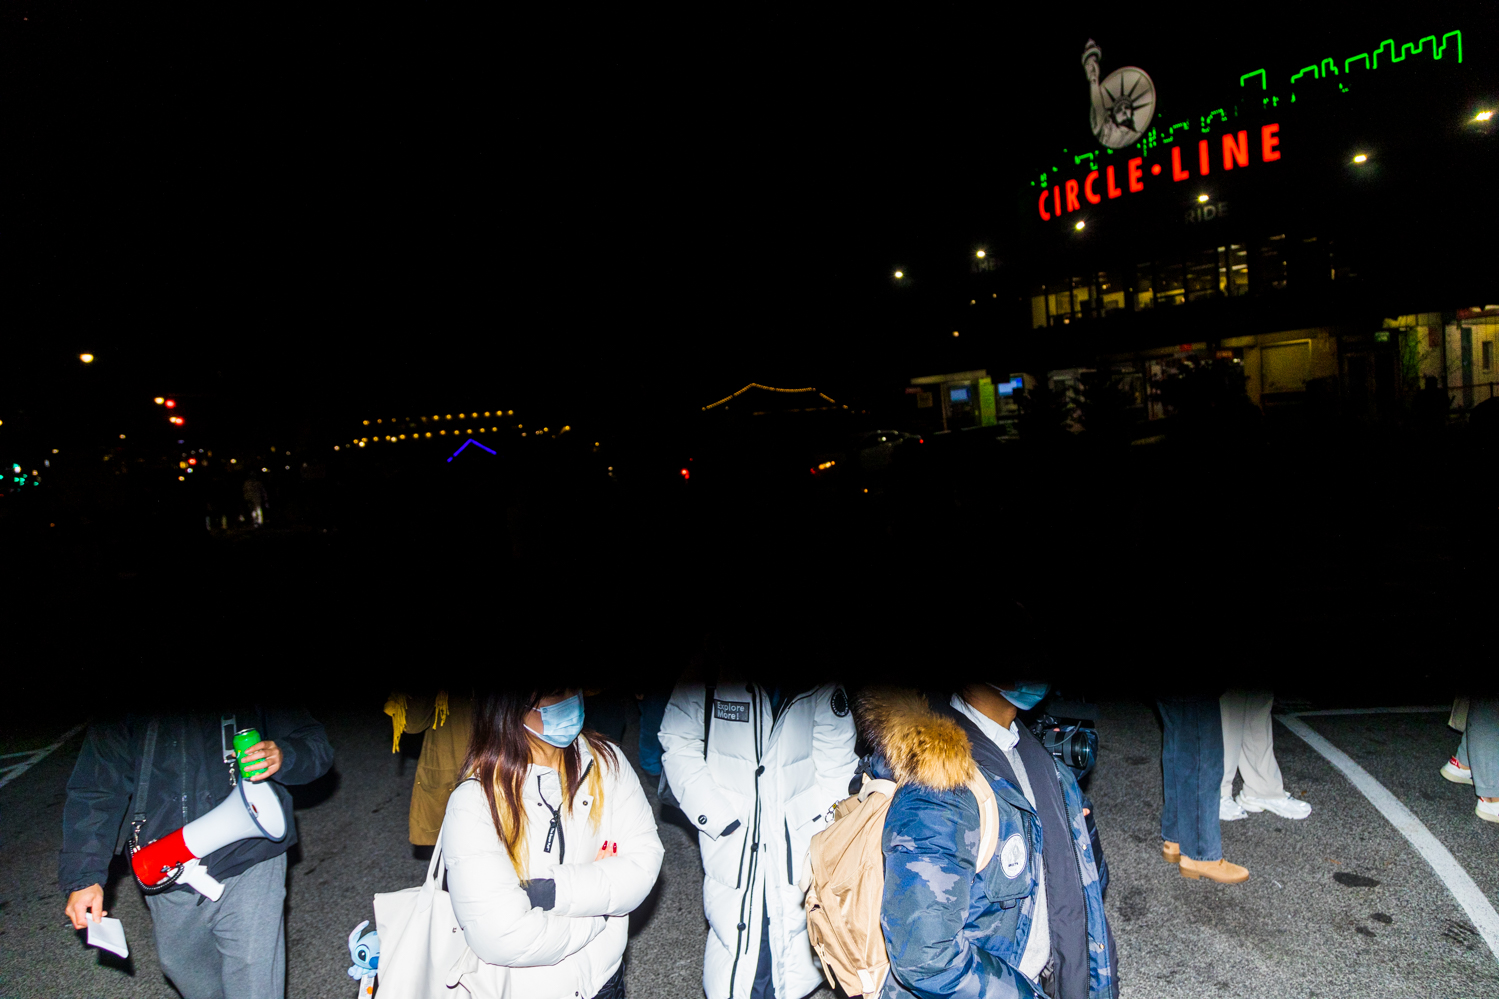 A half-exposed image showing the lower torsos of protesters proceeding to Pier 84 at Hudson River Park at night.